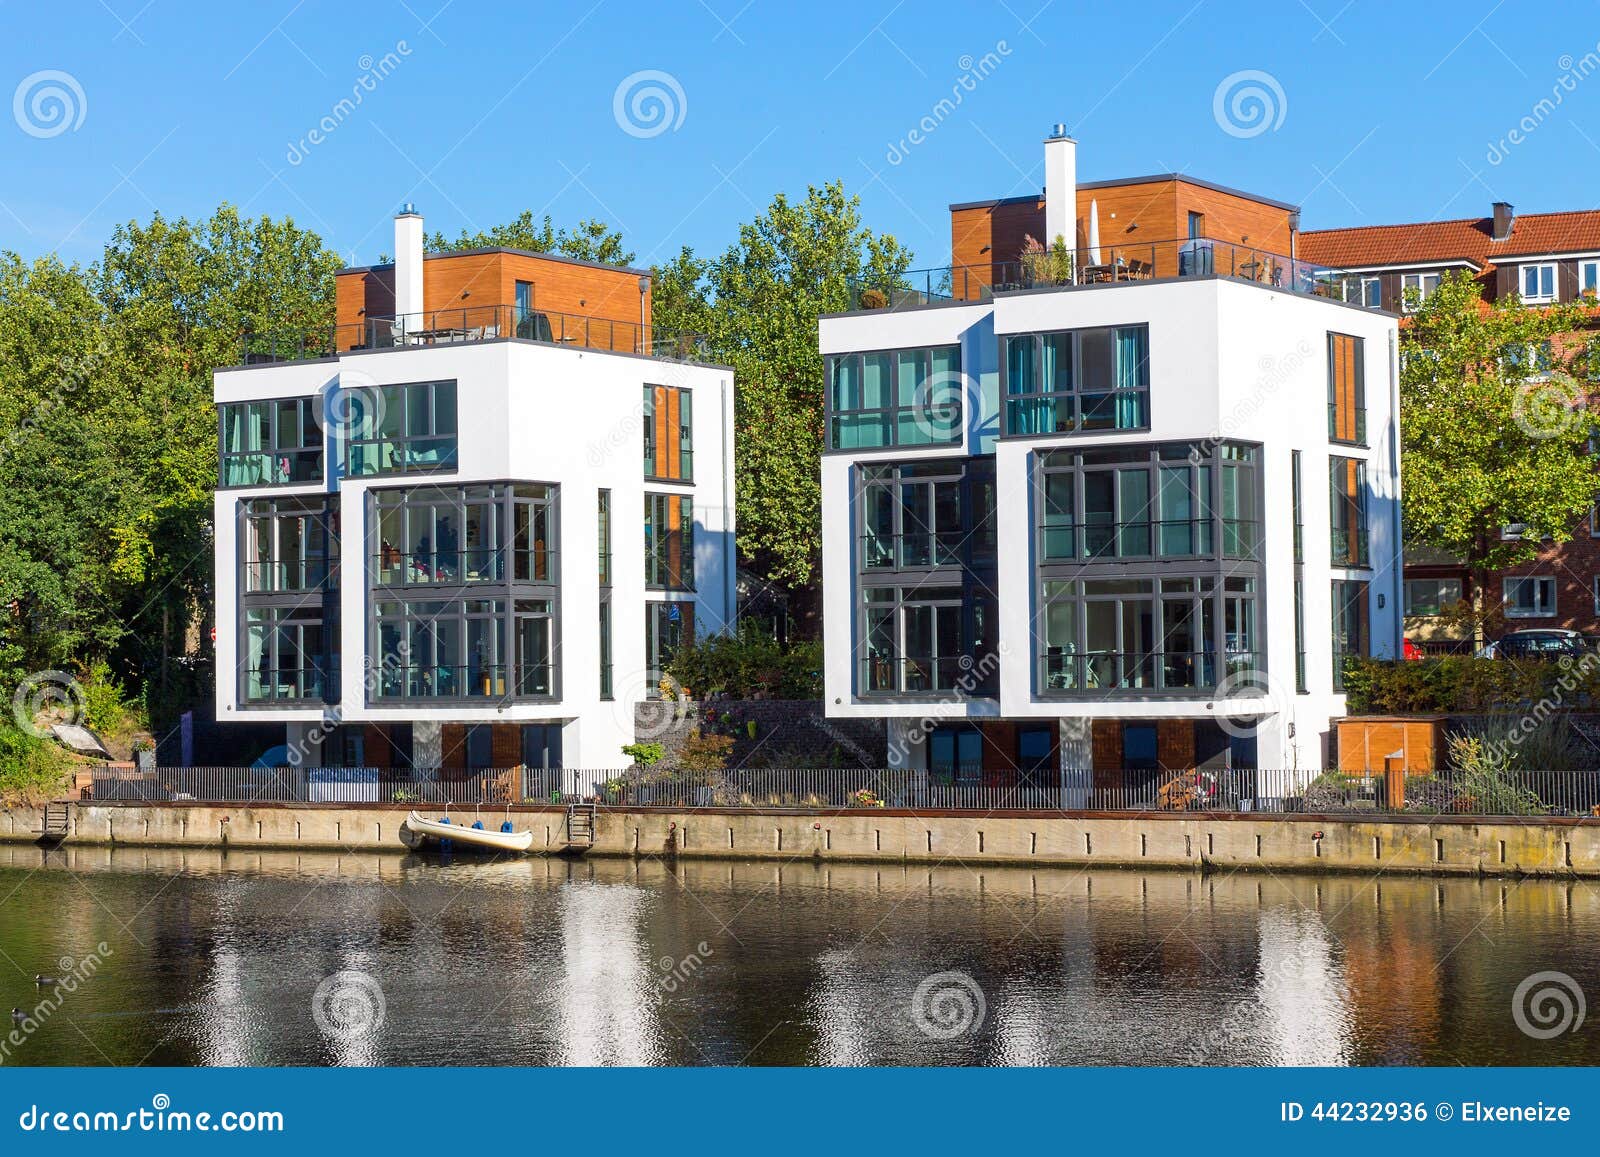 new houses at the waterside